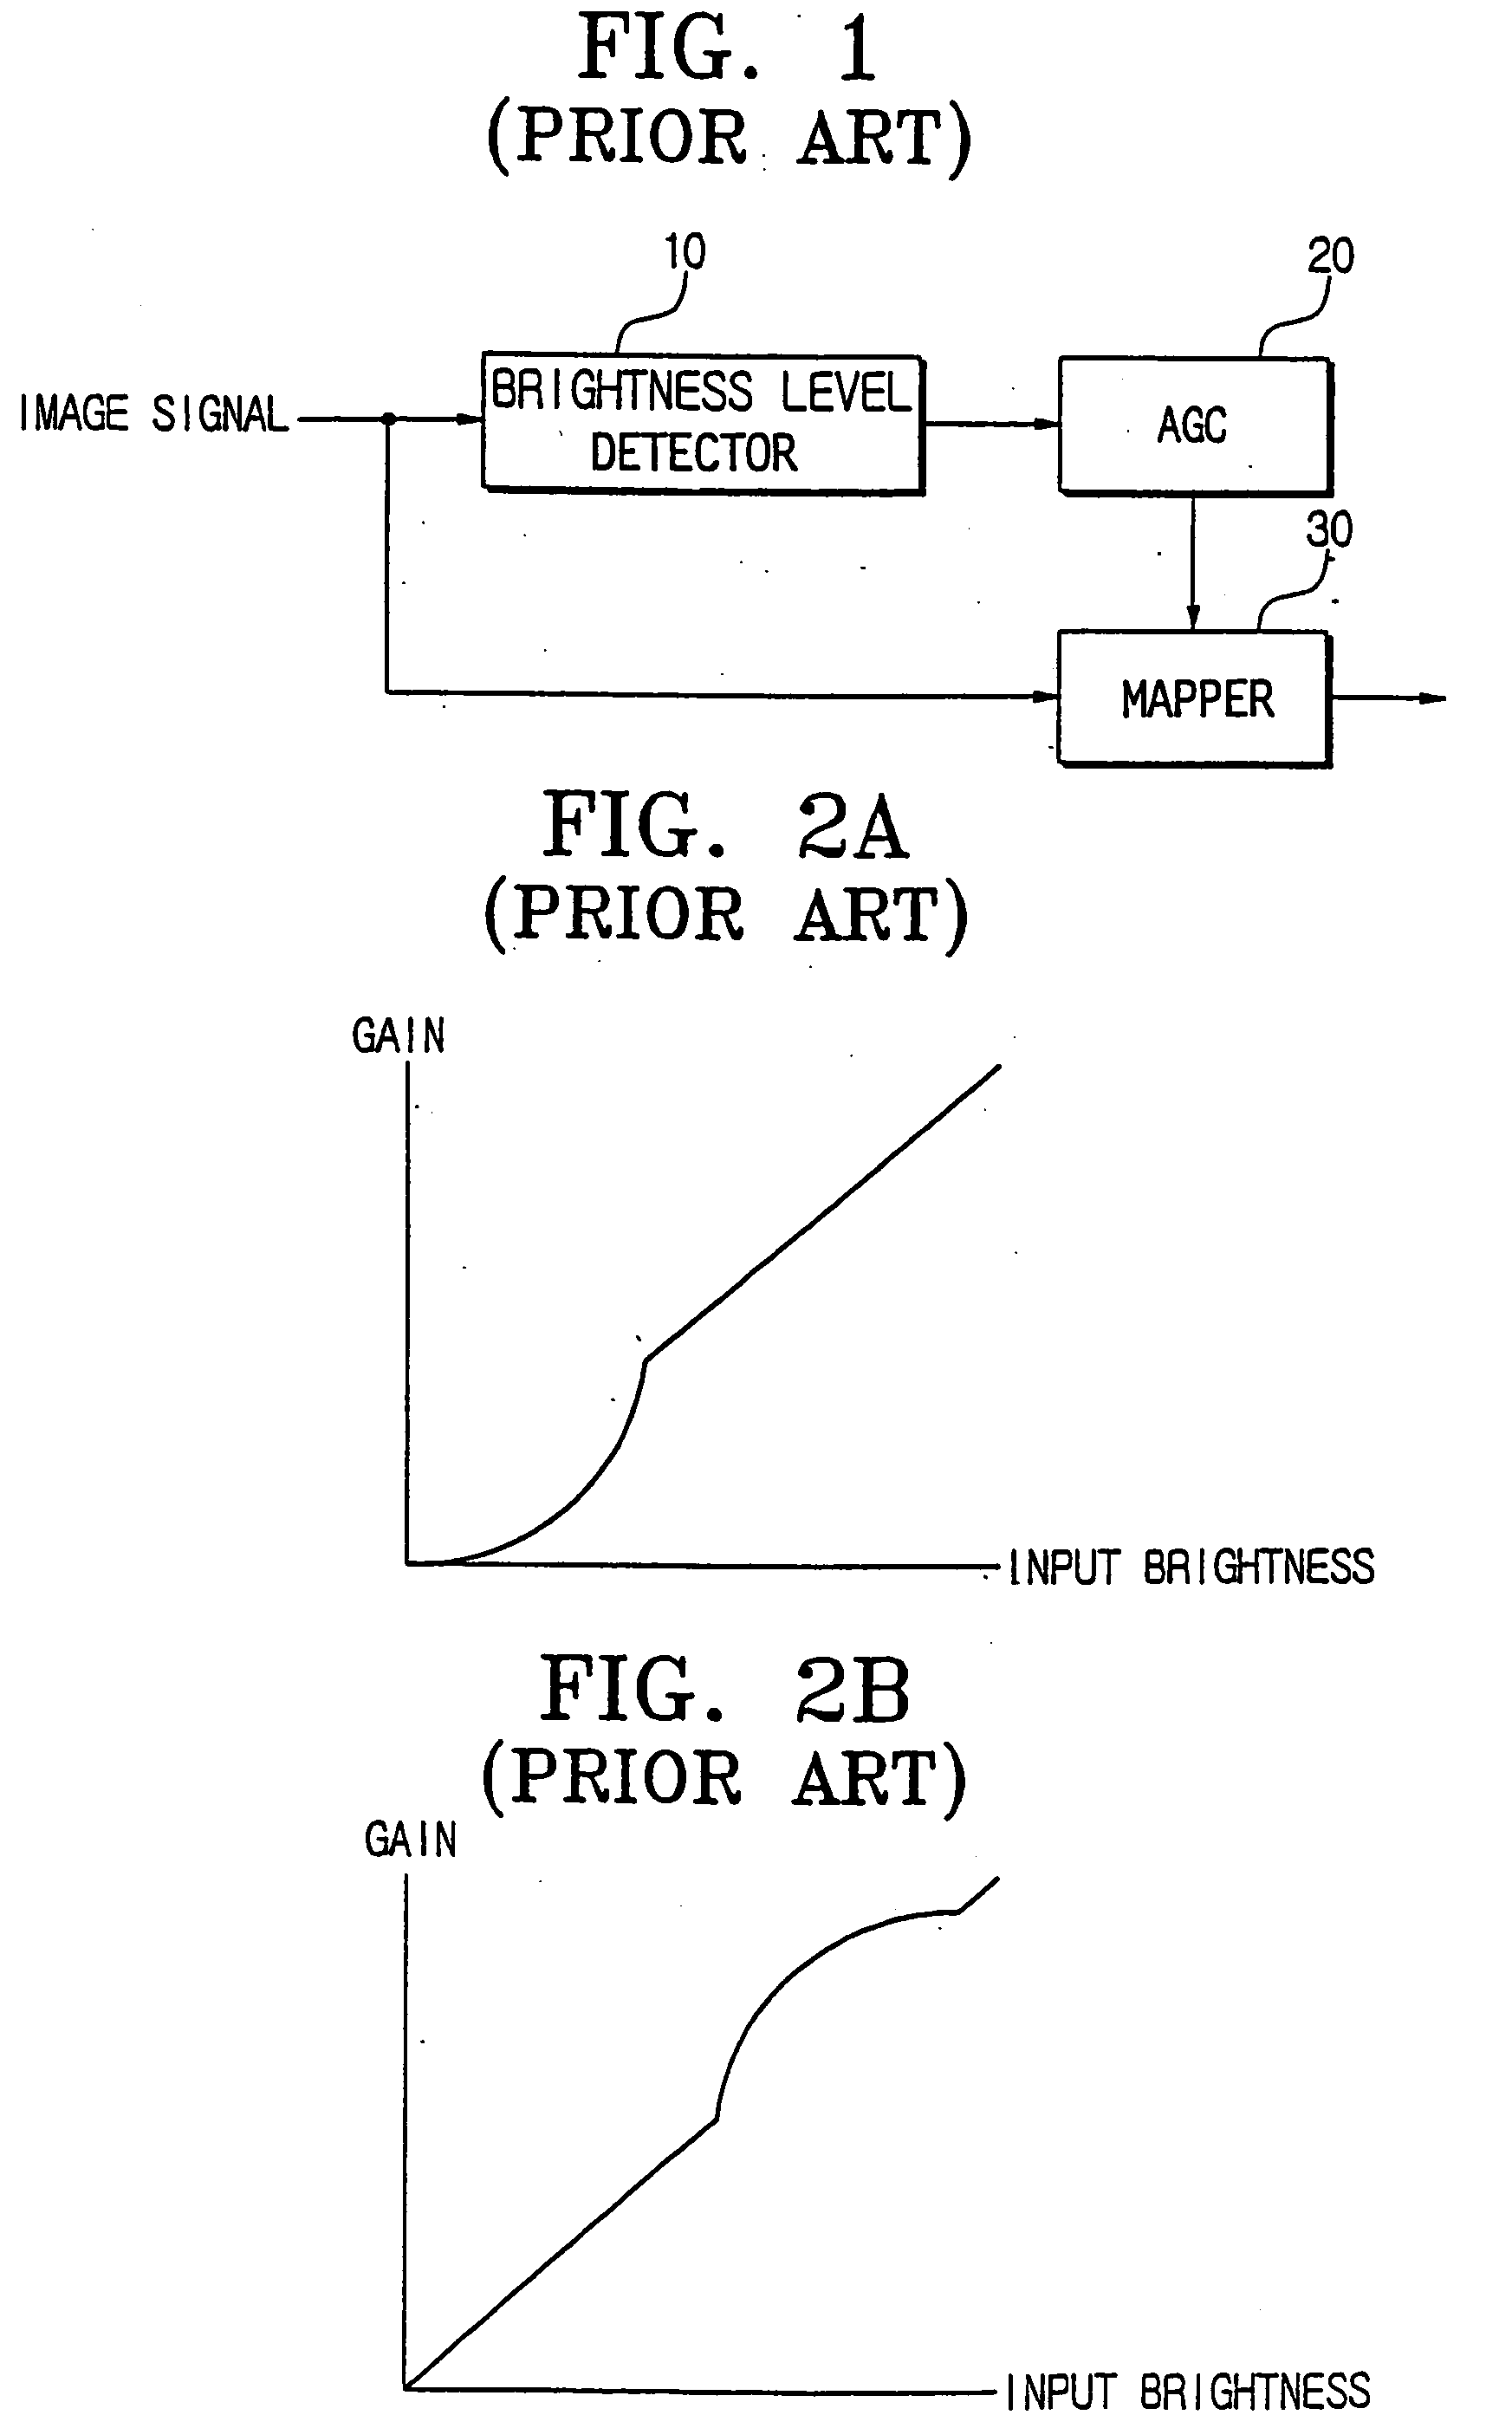 Apparatus and method for brightness control